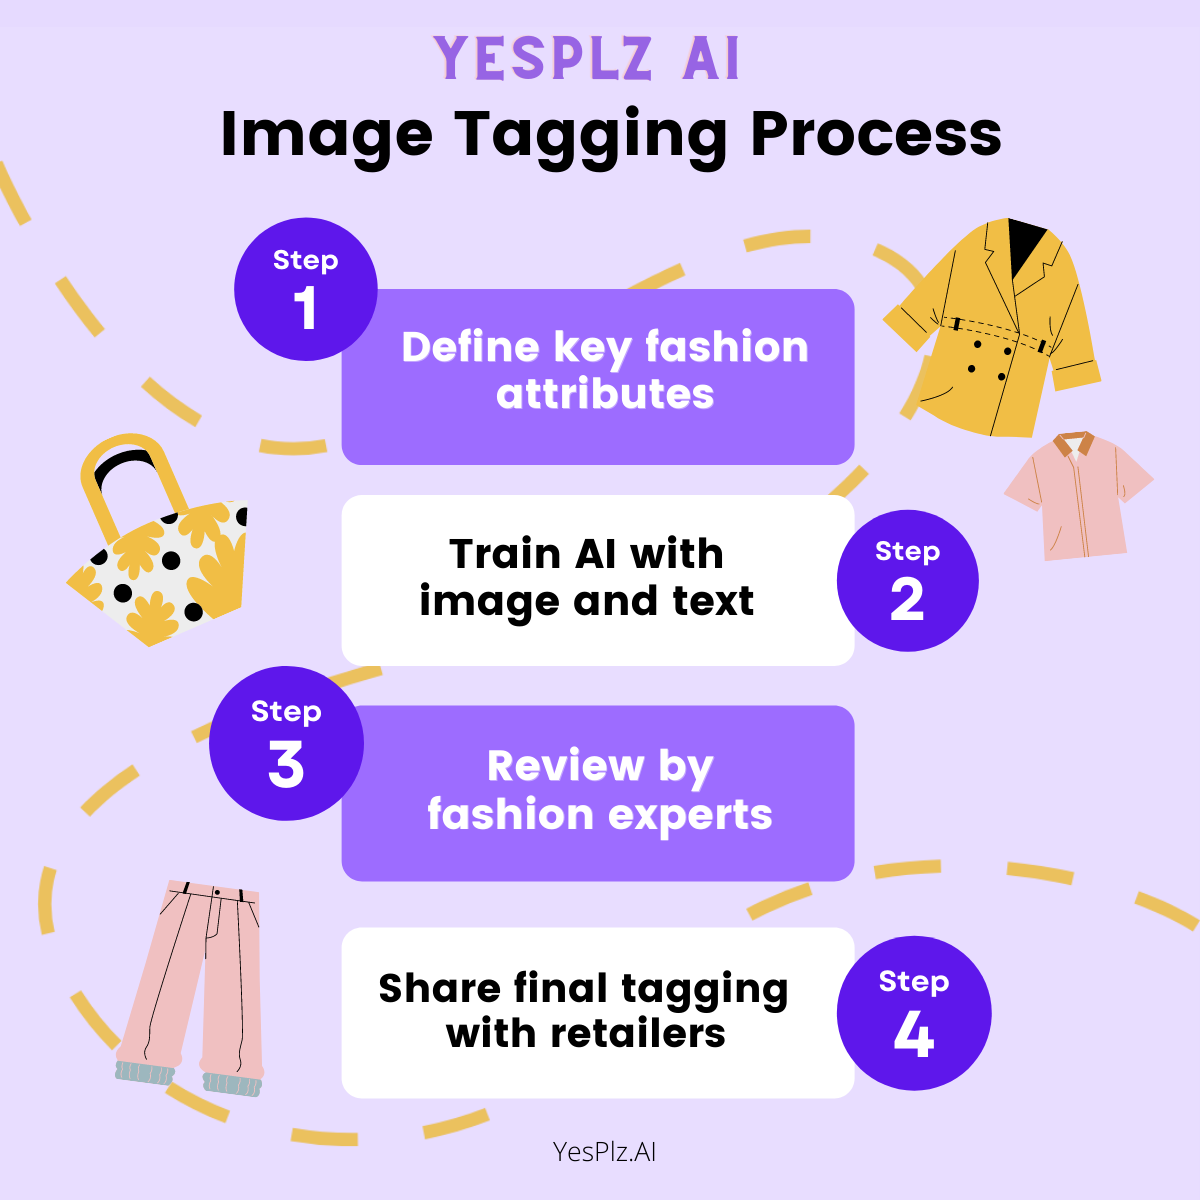 4 steps for fashion tagging by YesPlz AI